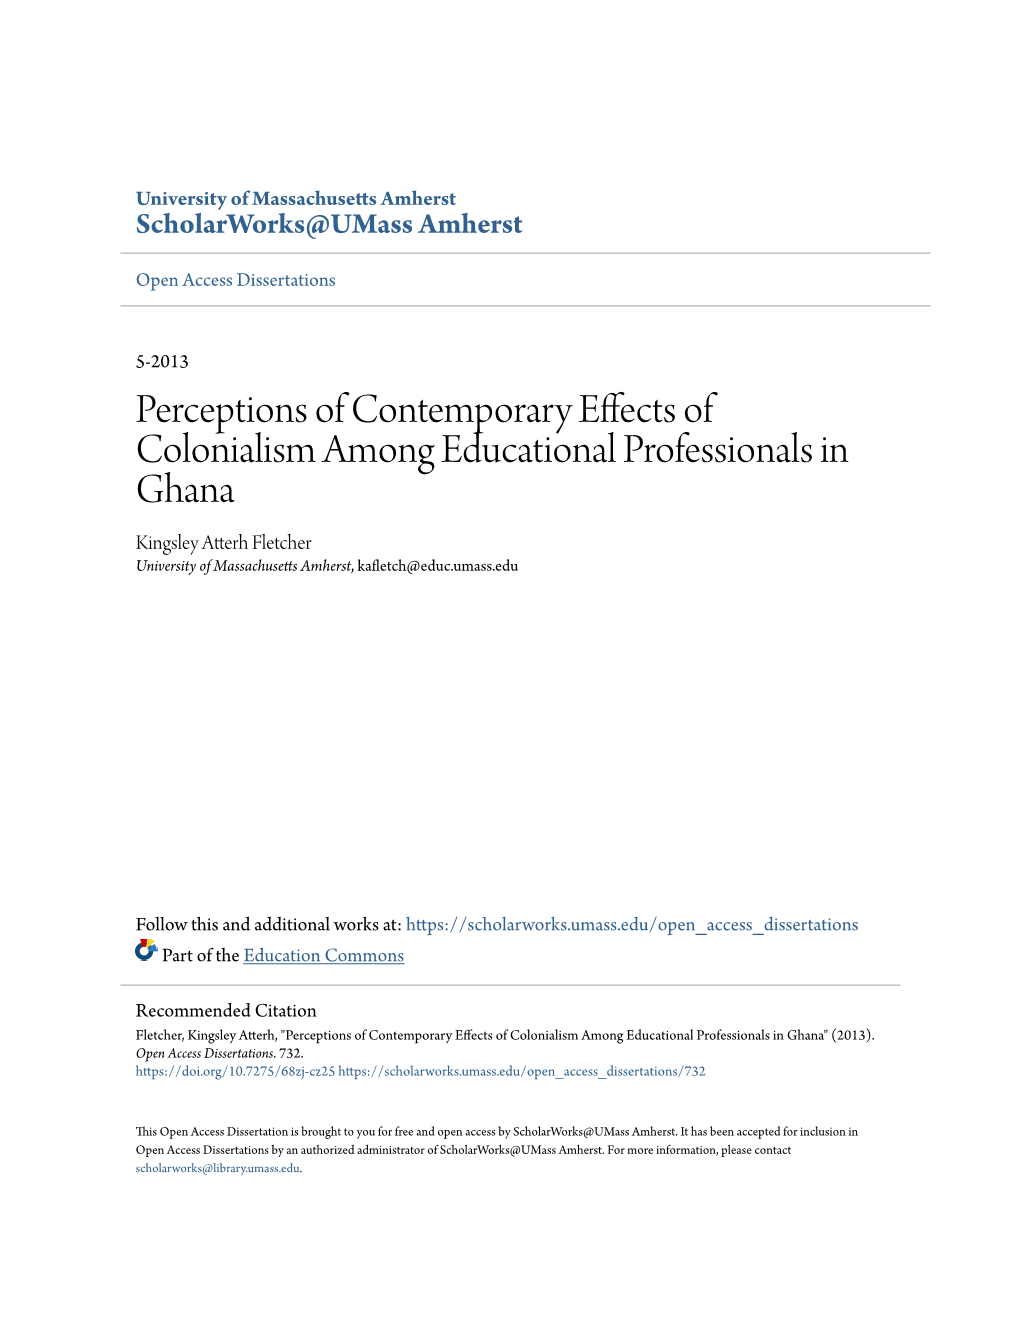 Perceptions of Contemporary Effects of Colonialism Among Educational